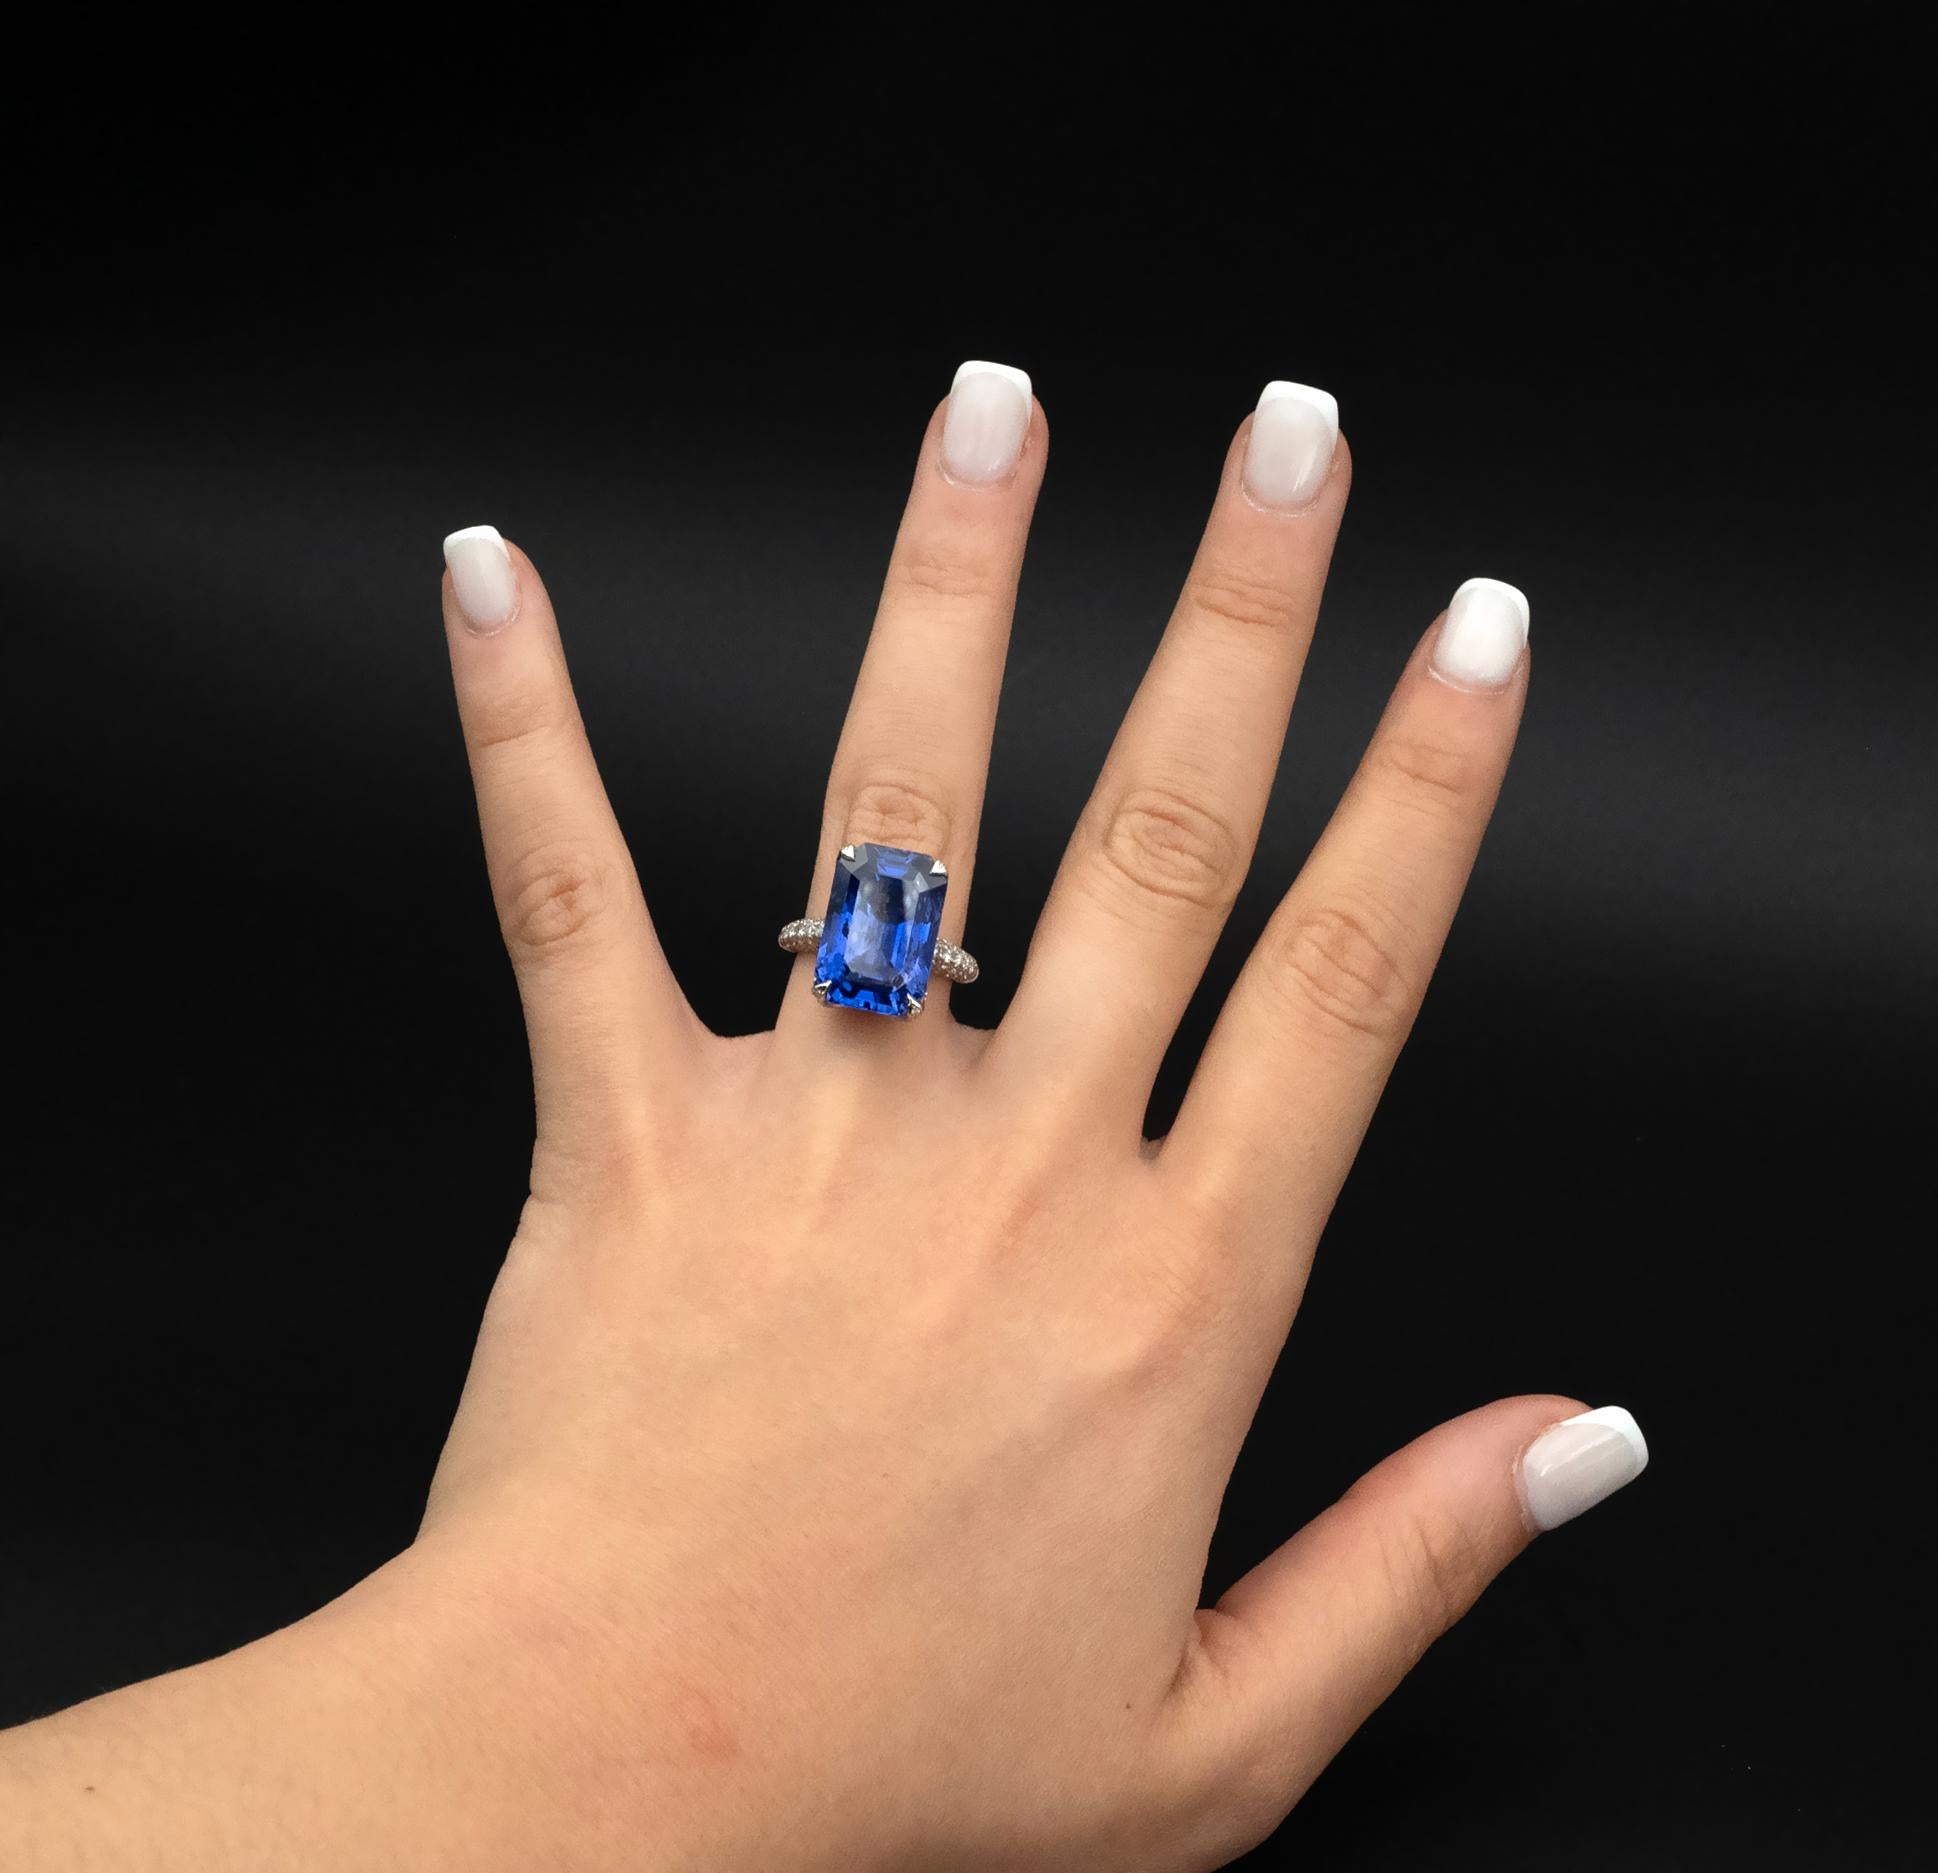 This exquisite cocktail ring showcases at its center a natural, unheated sapphire from Ceylon, weighing 17.67 carats. Its unique octagonal, emerald cut is rare for its size, enhancing the gemstone's allure. The sapphire's authenticity is certified